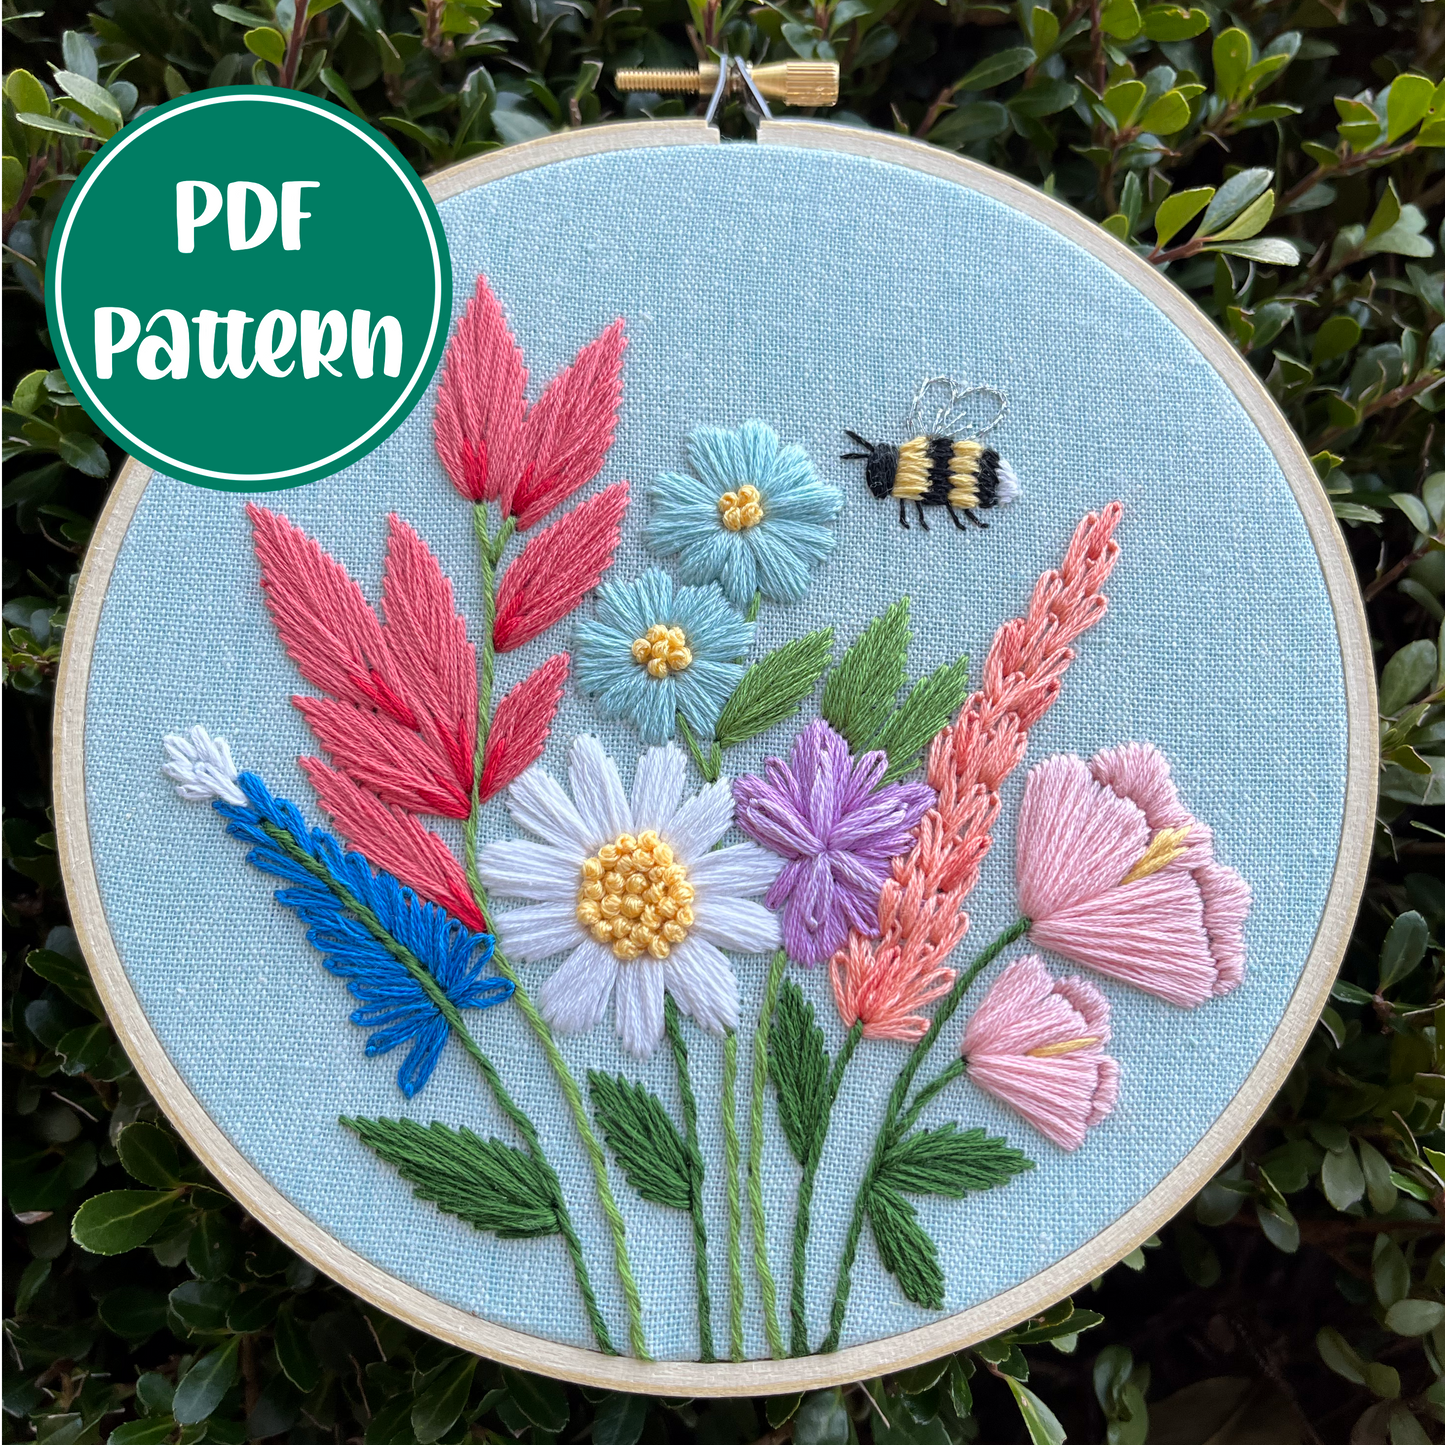 PDF Pattern - Bee Wild, Intermediate Bumble Bee/Floral Embroidery Pattern